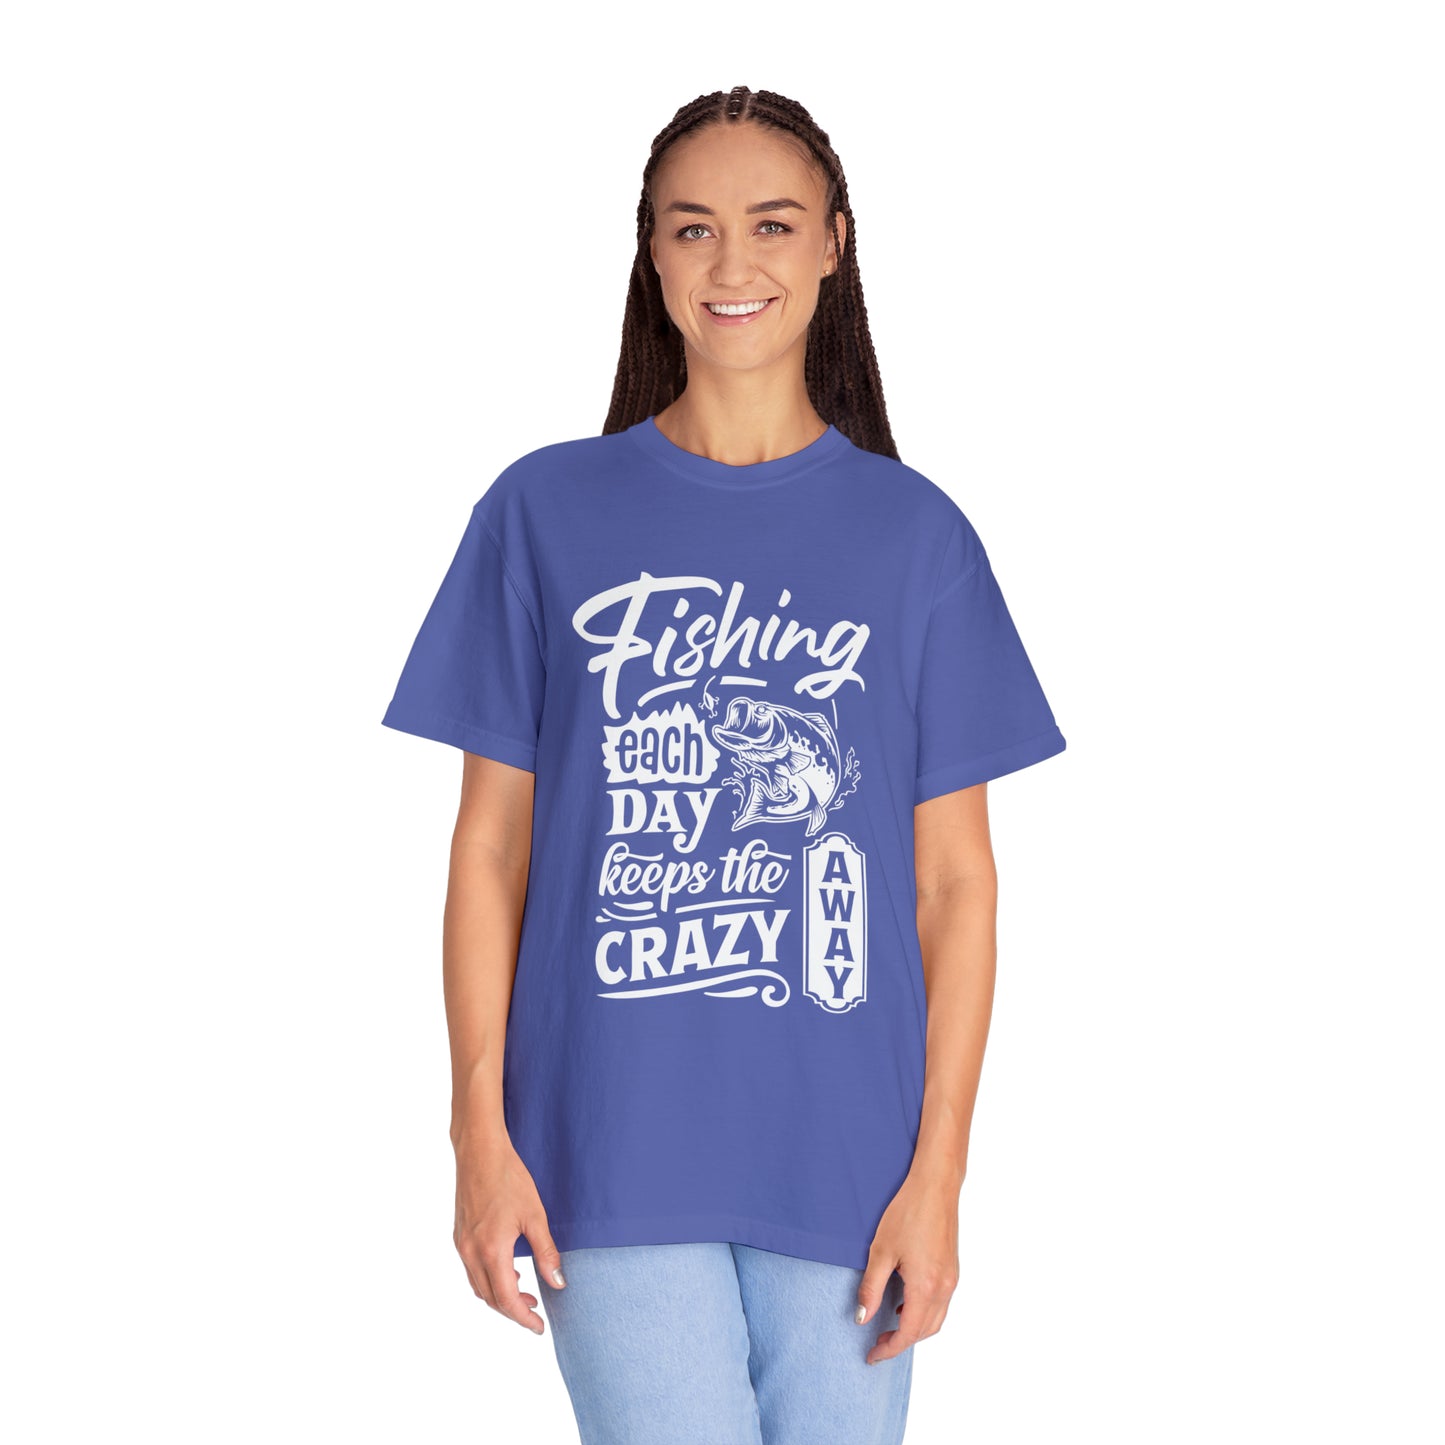 Stay Sane with Daily Fishing Adventures T-shirt